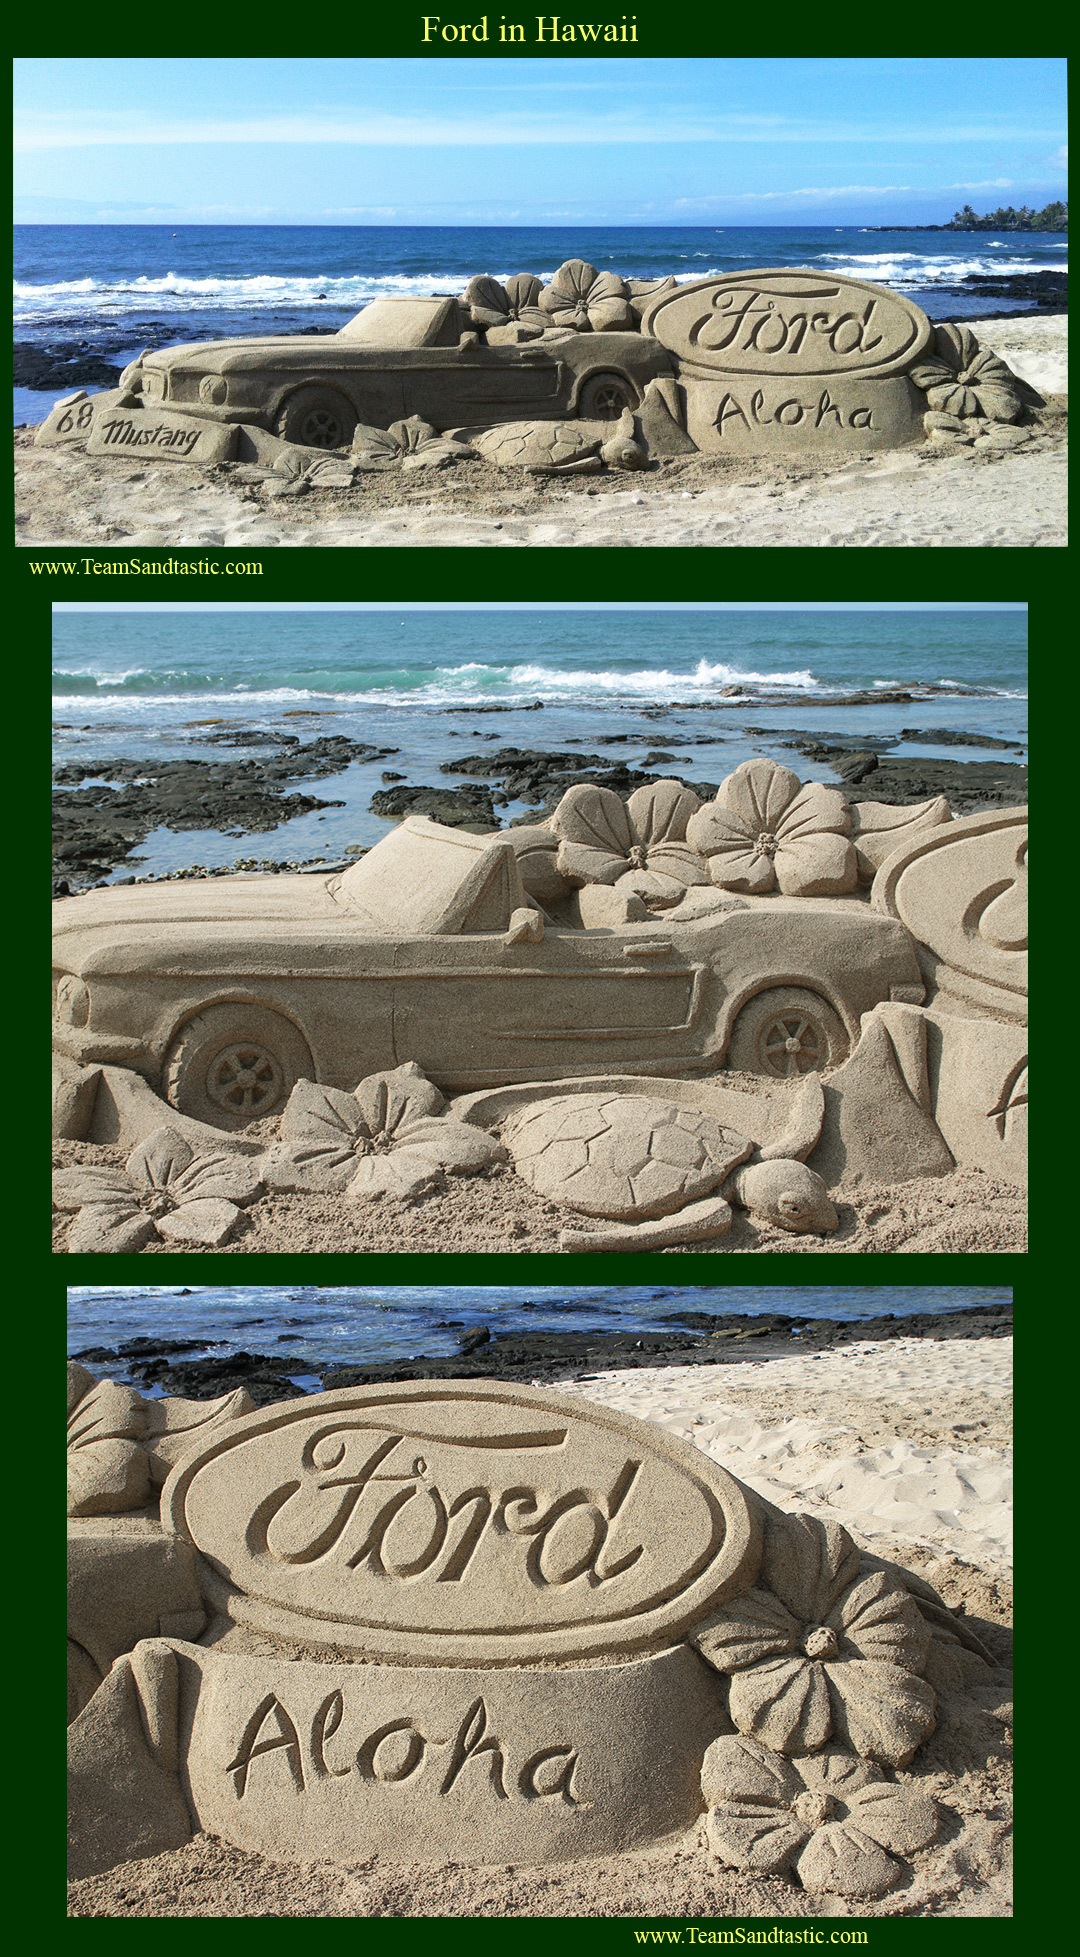 Ford in Hawaii Sand Sculpture